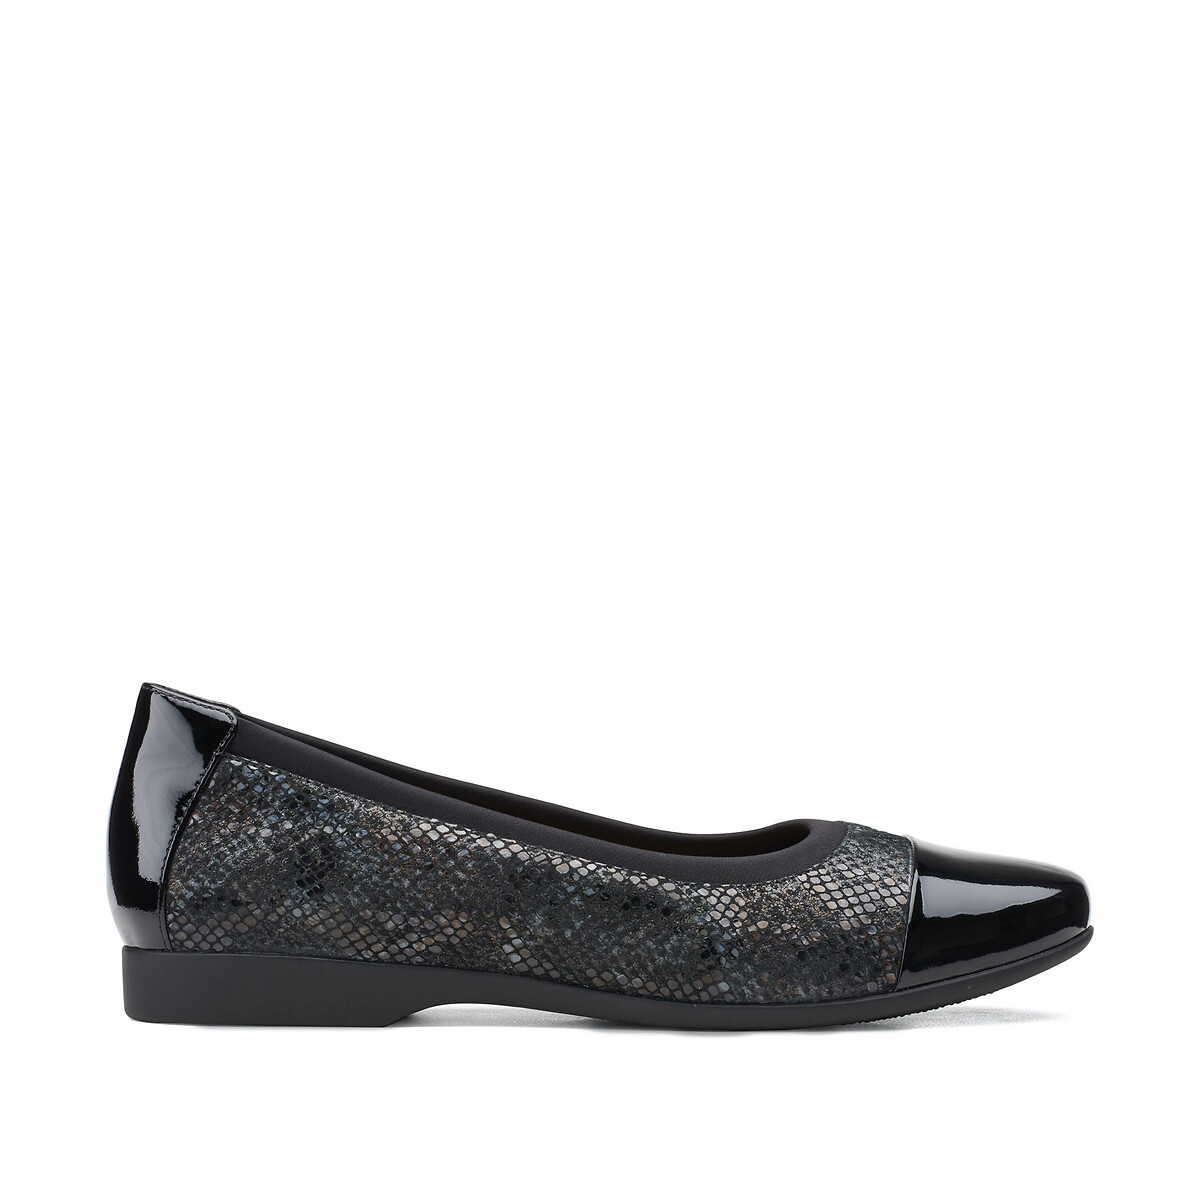 Clarks Un Darcey Cap2 Ballet Flats In Snake Print Leather